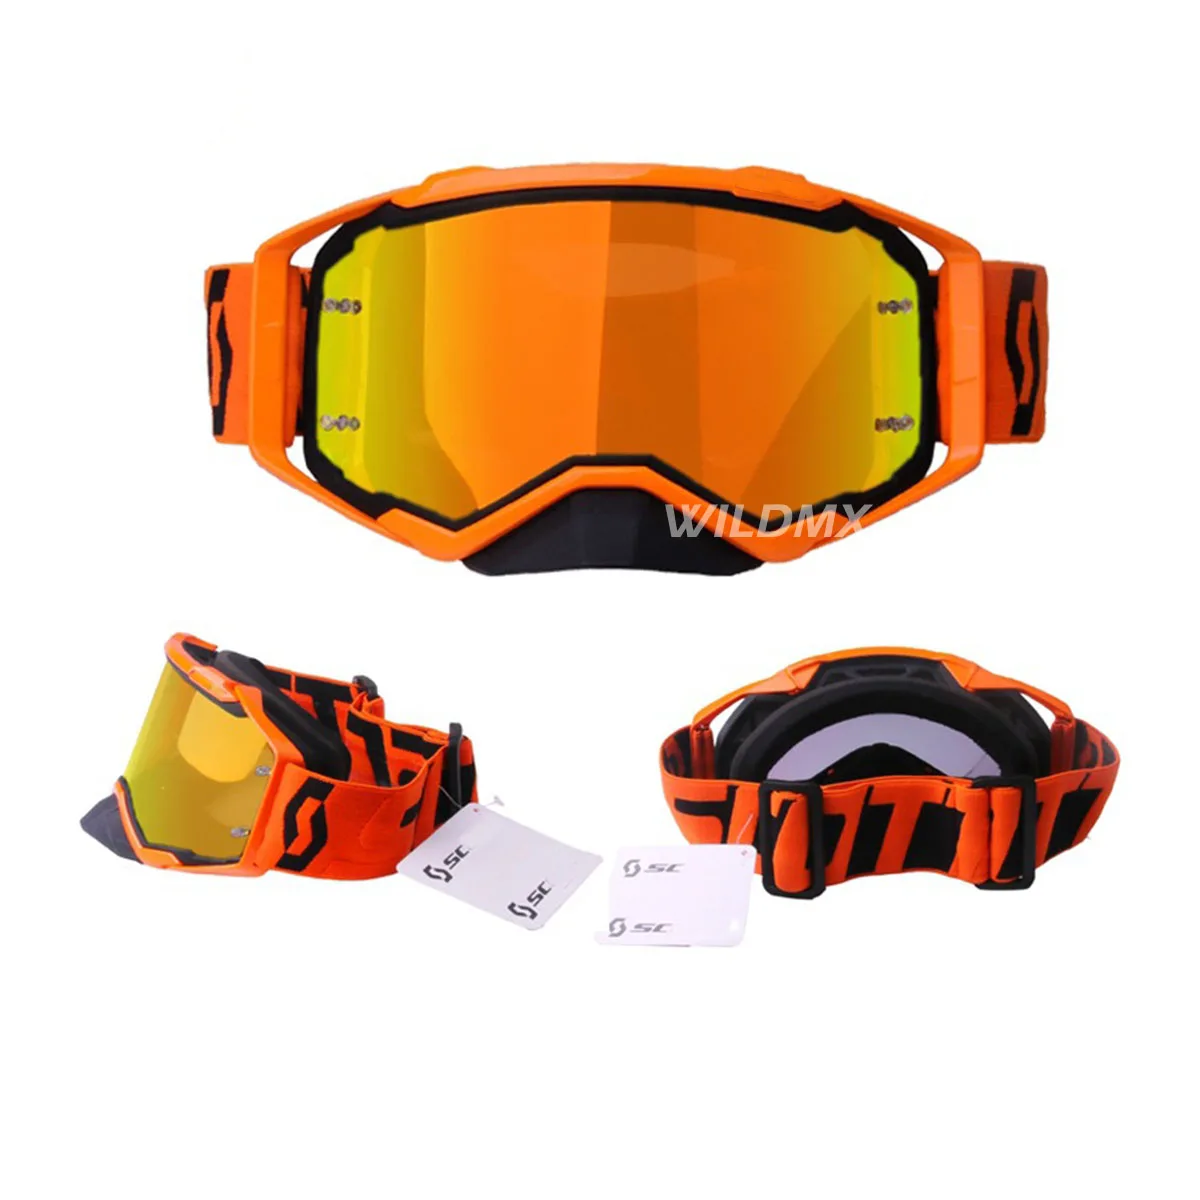 

Wildmx Dust proof Adult ATV Motorcycle Motocross scotts Goggles Racing Goggles Dirt Bike MX DH MTB off road Goggle Glasses, Customized color